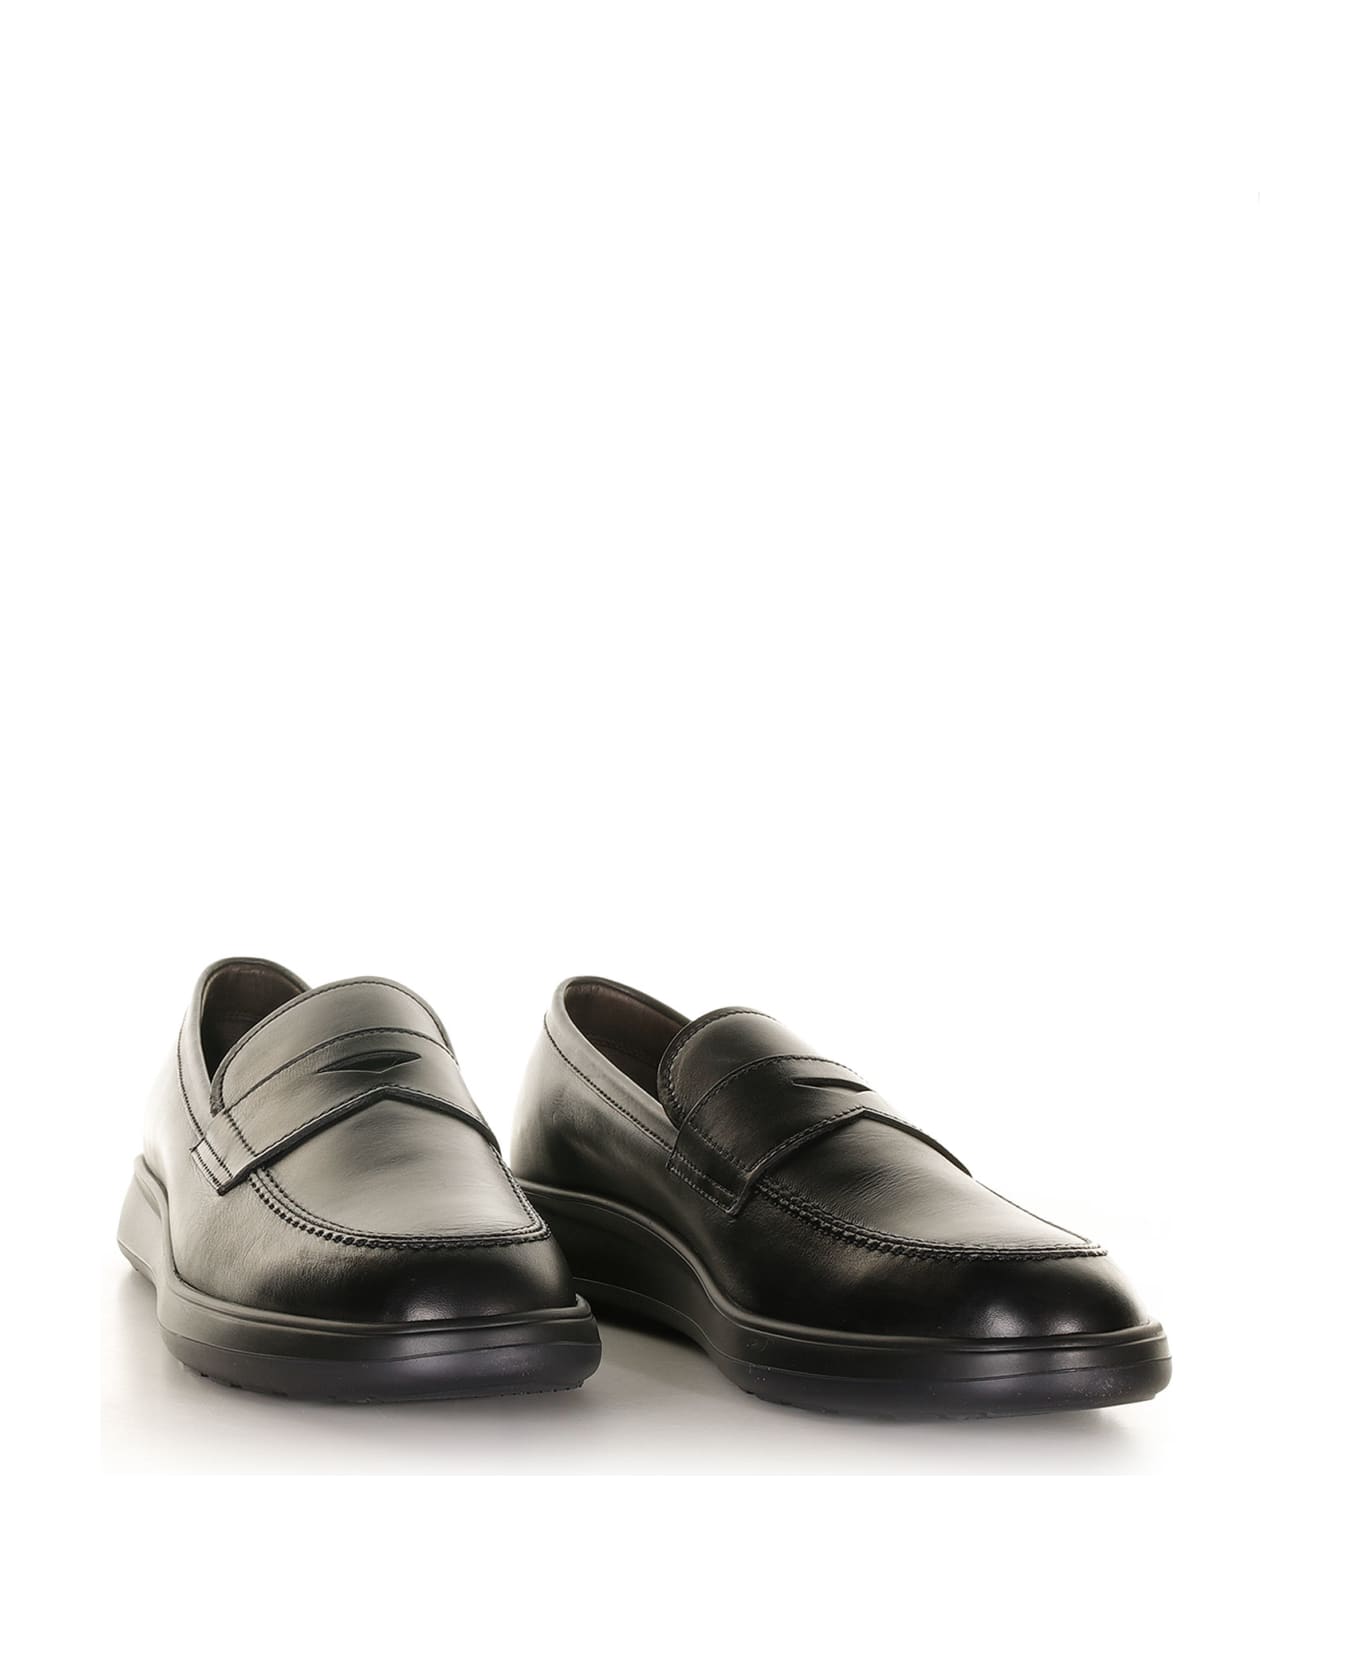 Fratelli Rossetti One Black Leather Loafers - NERO